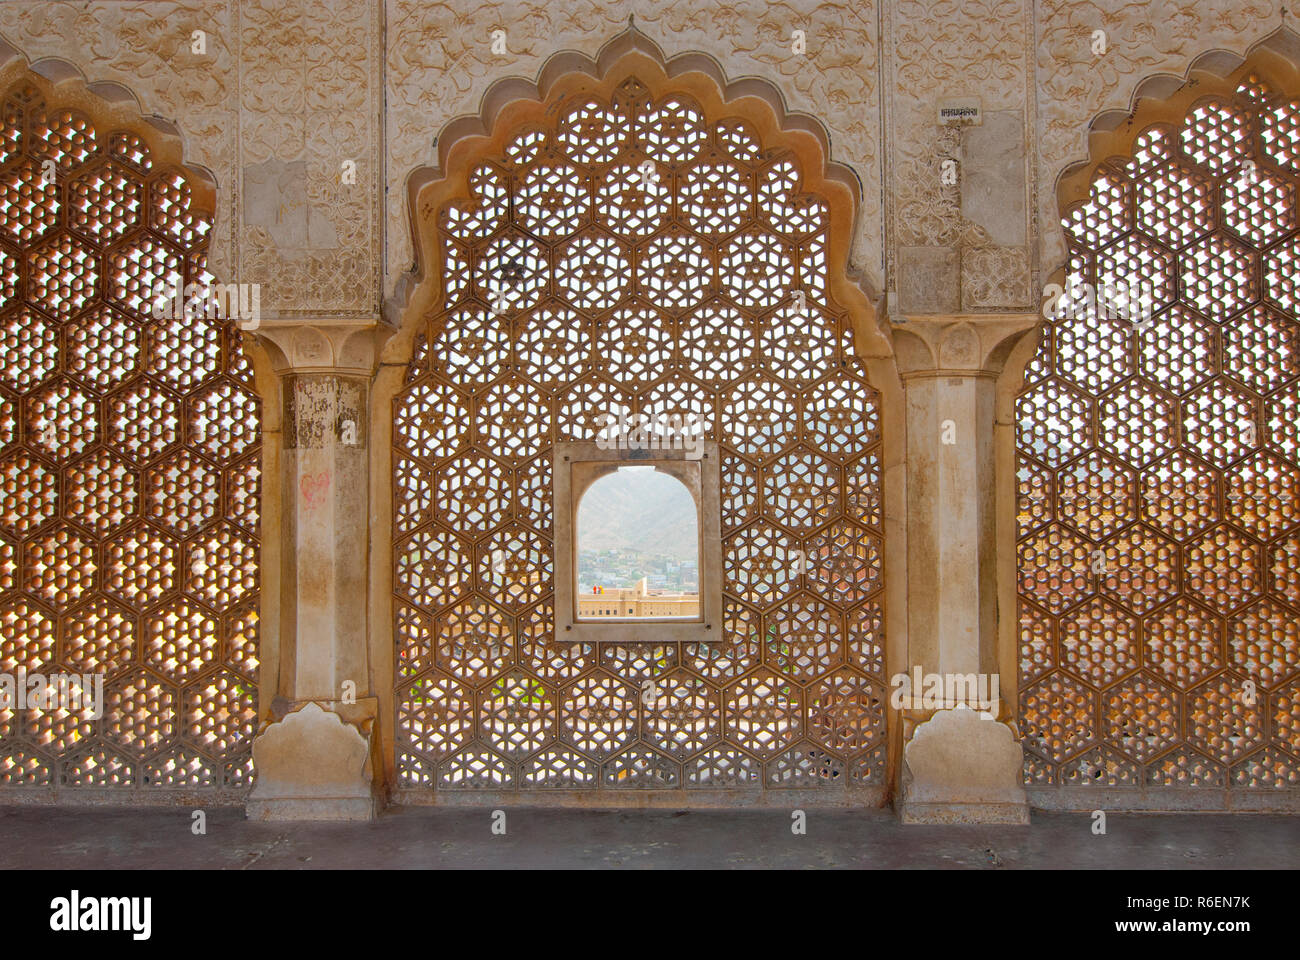 Looking Through Stone Lattice Window To The Walls Of Amber Fort Stock Photo